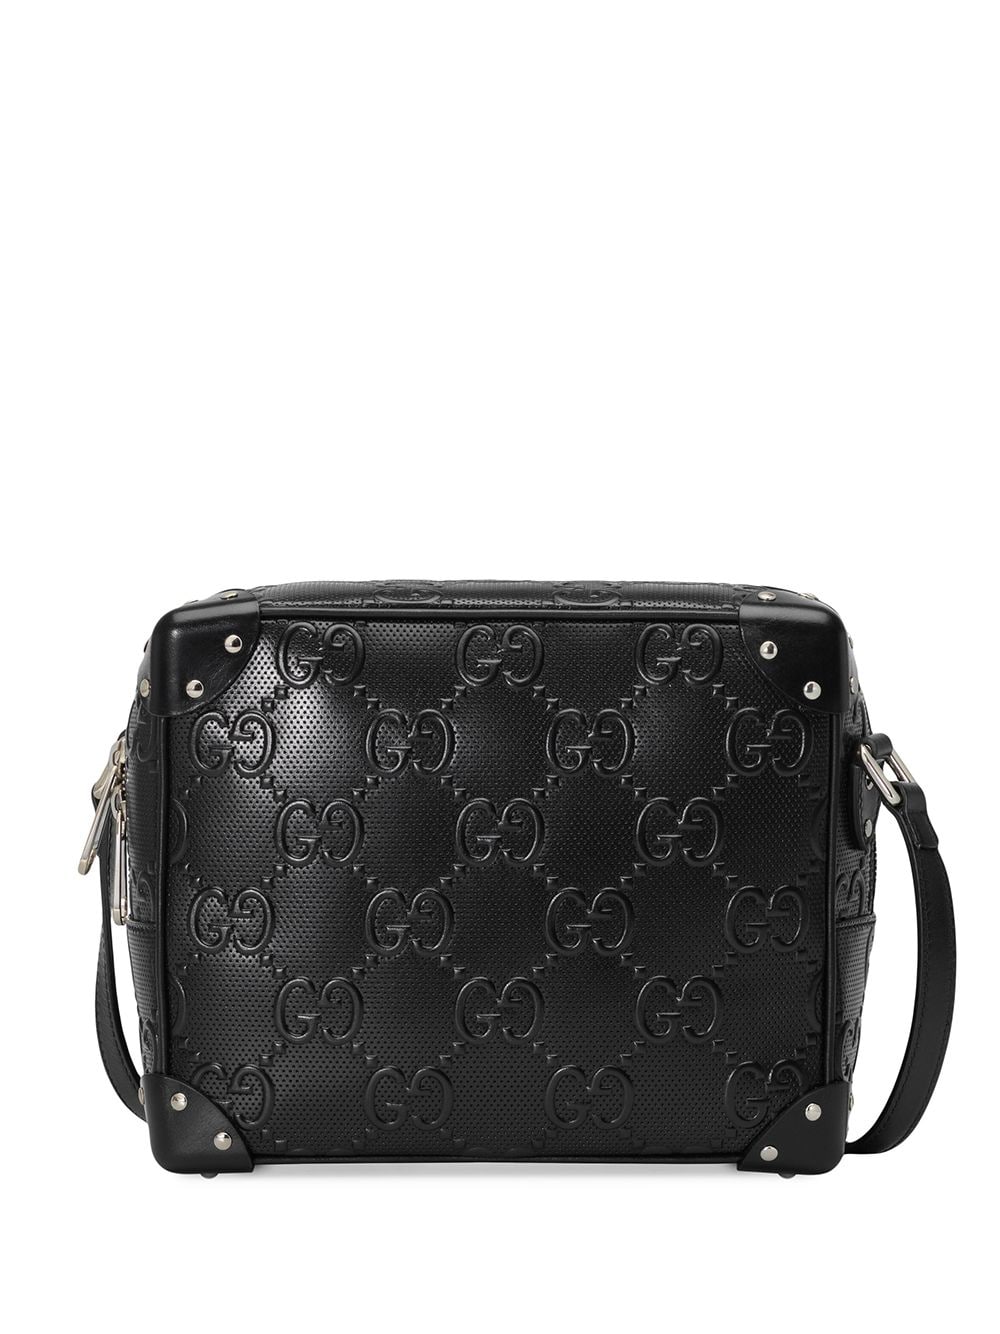 Shop Gucci GG embossed shoulder bag with Express Delivery - FARFETCH